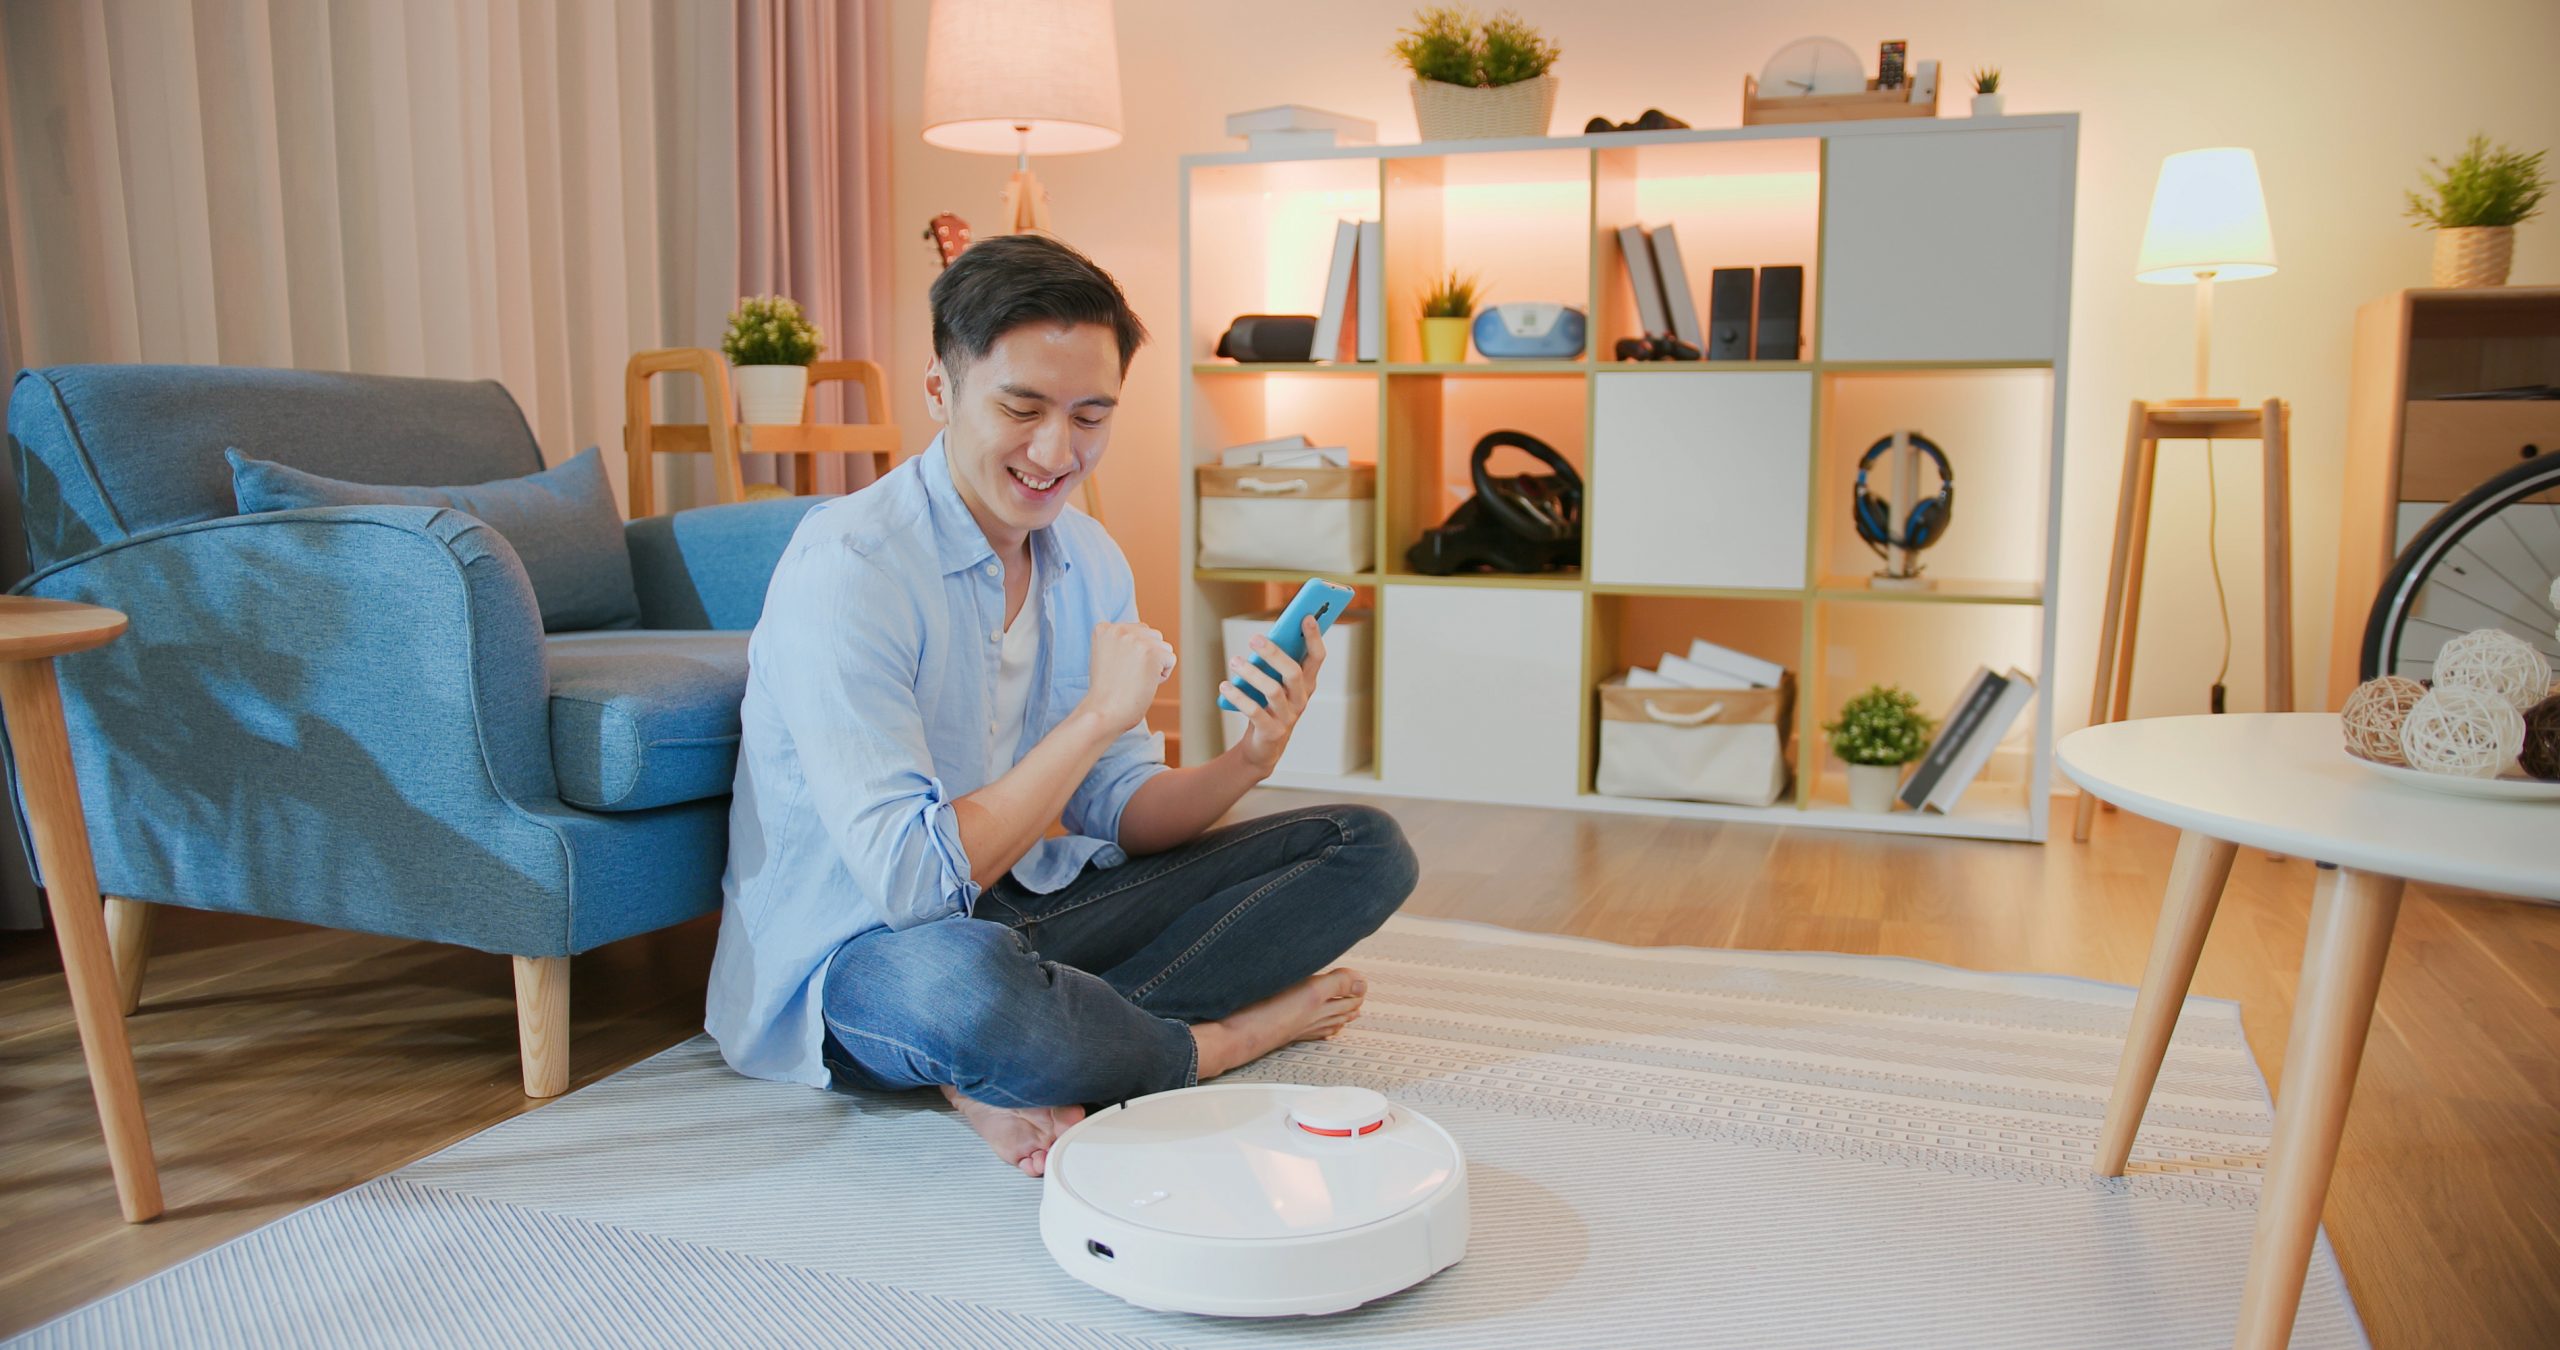 Young Asian man sitting on floor programming robot vacuum with smartphone